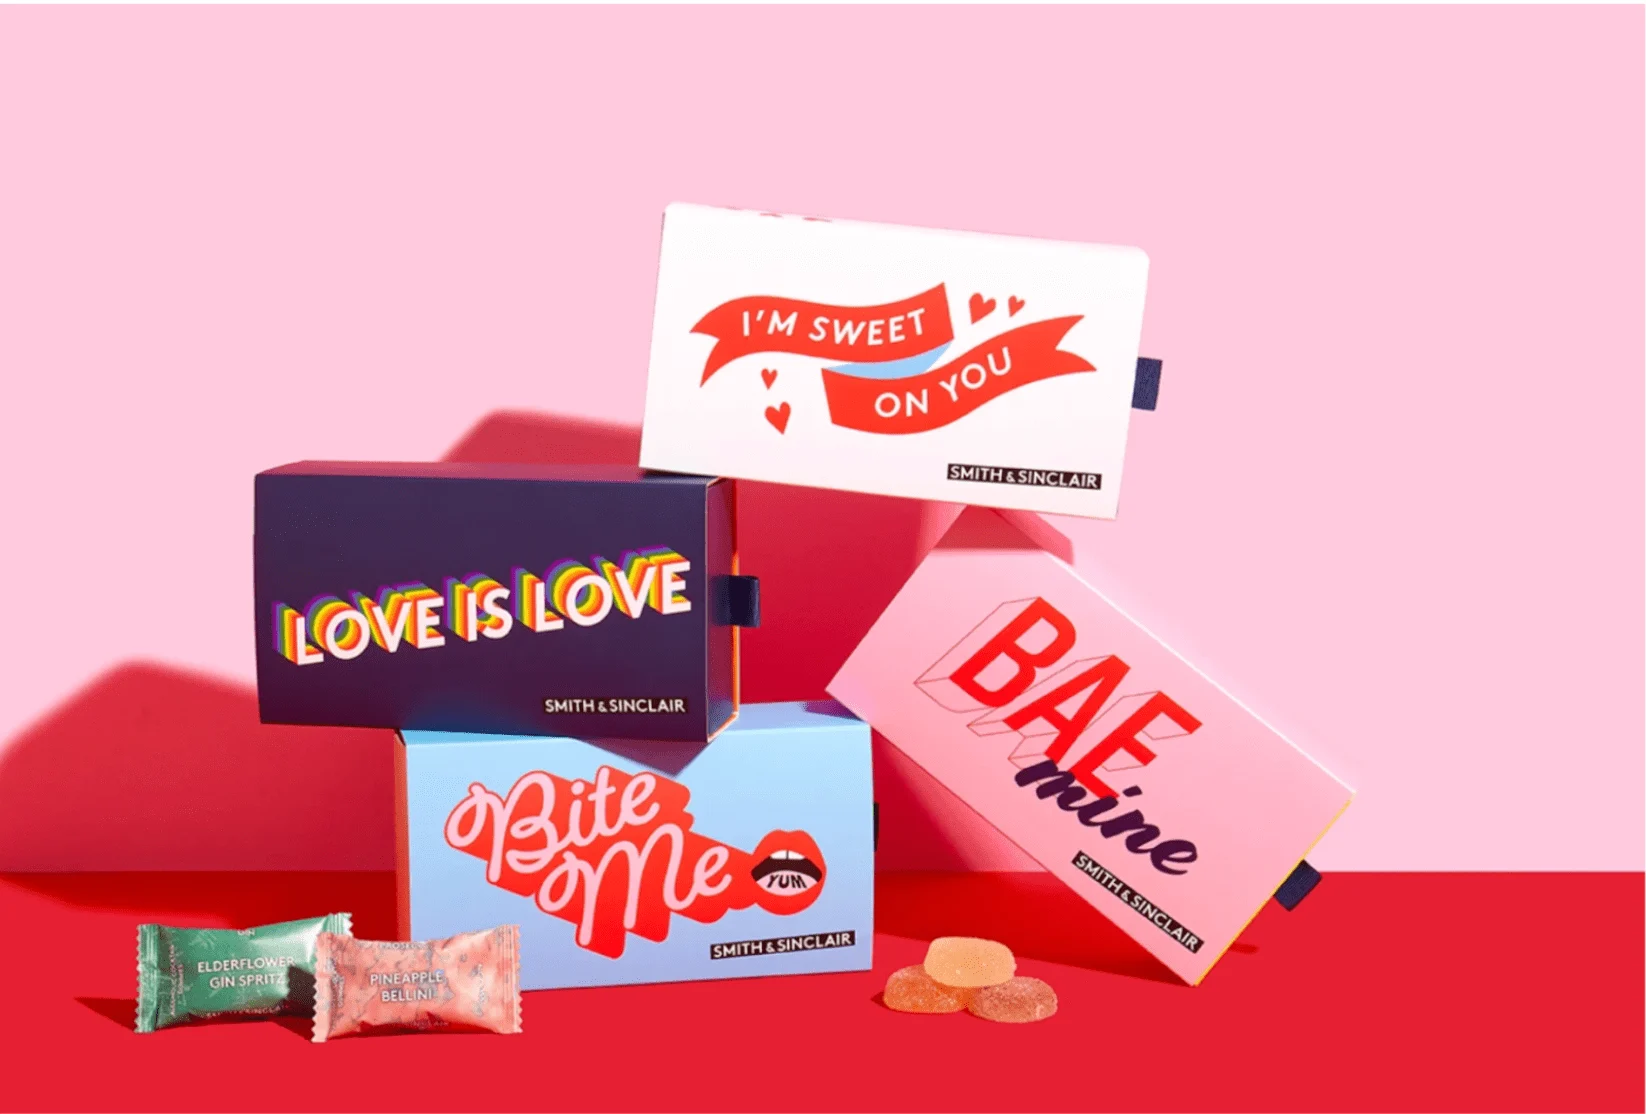 Smith & Sinclair’s Valentine’s Day boxes take their chocolates from lust to love